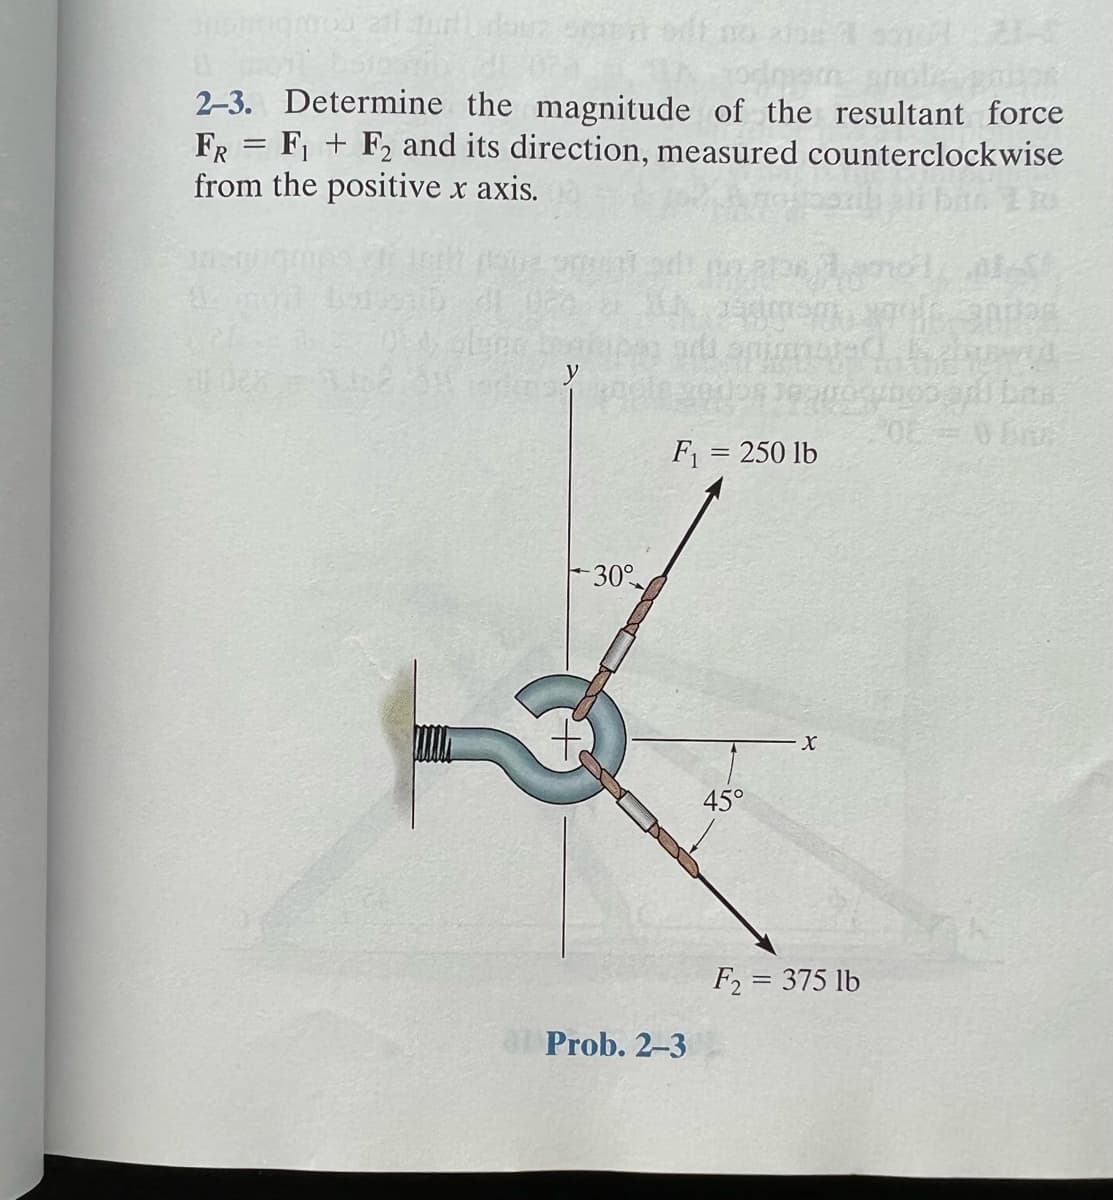 inserigrovo atitur nous orat mit alpe Au
nobe
2-3. Determine the magnitude of the resultant force
FR = F₁+F₂ and its direction, measured counterclockwise
from the positive x axis.
A moi borist 31 022
y
zaple
-30%
Jednem 1706 200
Babypa
F₁ = 250 lb
Prob. 2-3
45°
X
F2 = 375 lb
ypopadl bas
206 = 0 BR